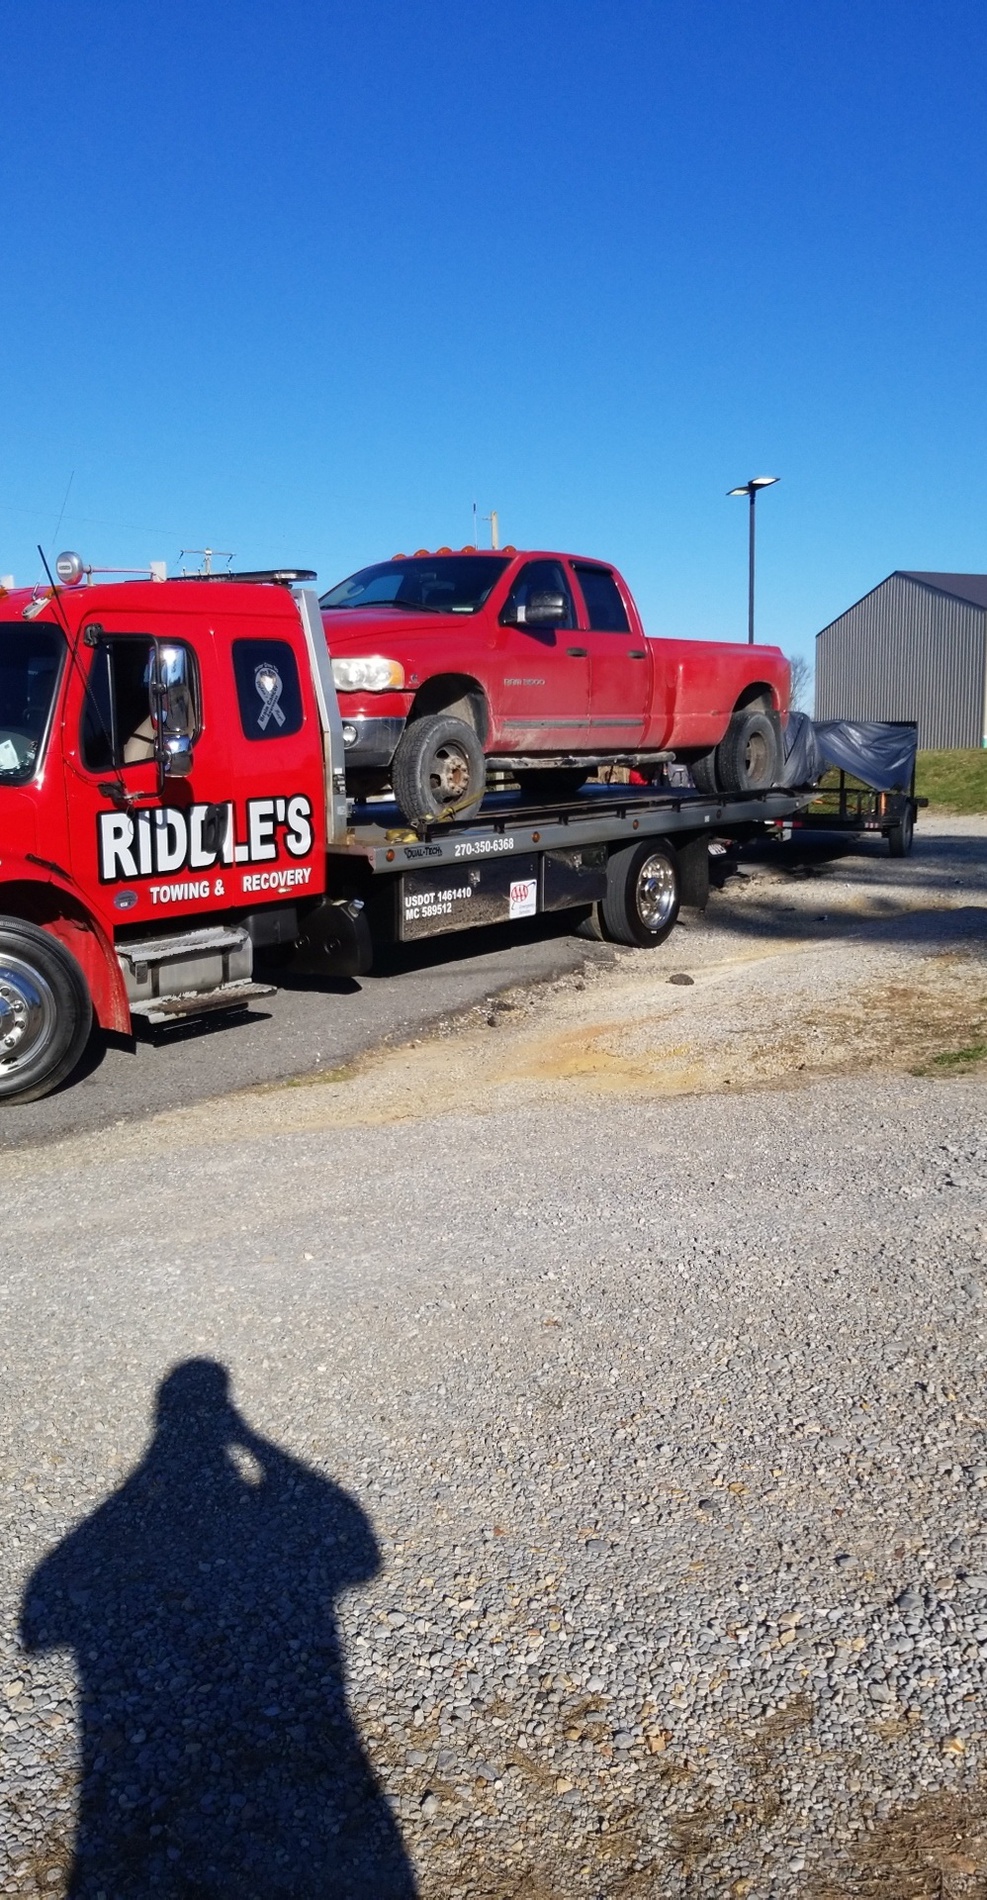 Images Riddle's 24 Hour Towing & Lockout, LLC